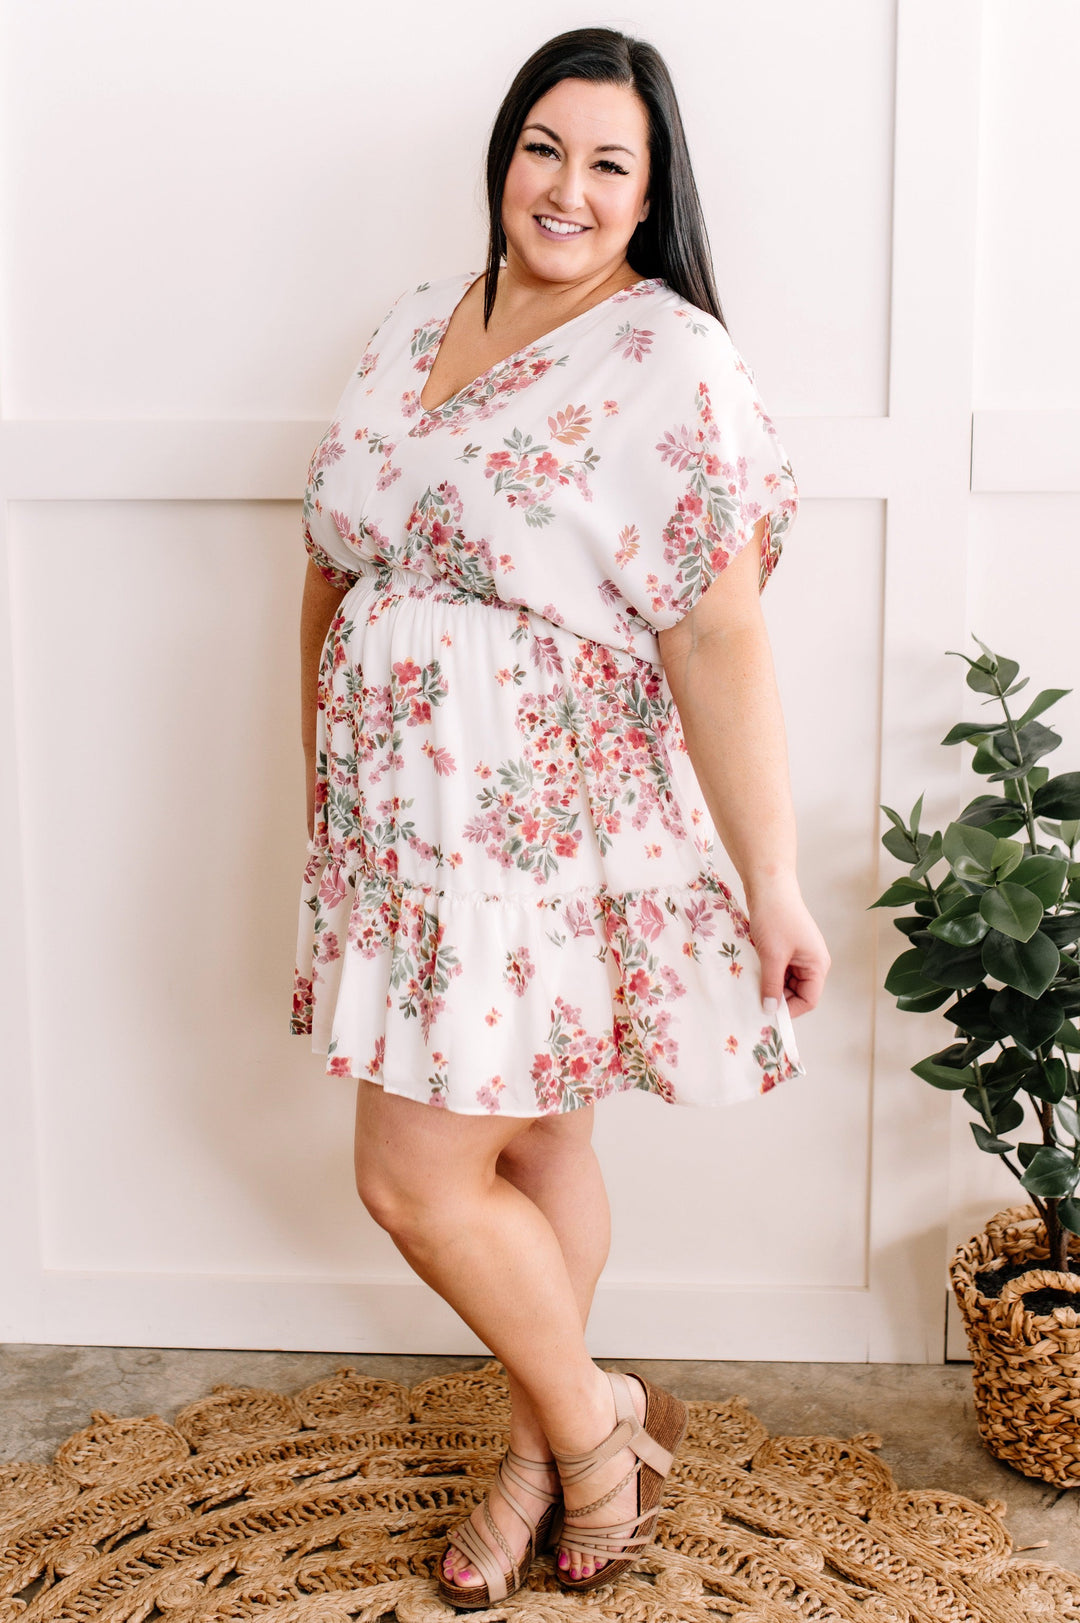 V-Neck Ivory Floral Dress In Sage & Cherry-Inspired by Justeen-Women's Clothing Boutique in Chicago, Illinois